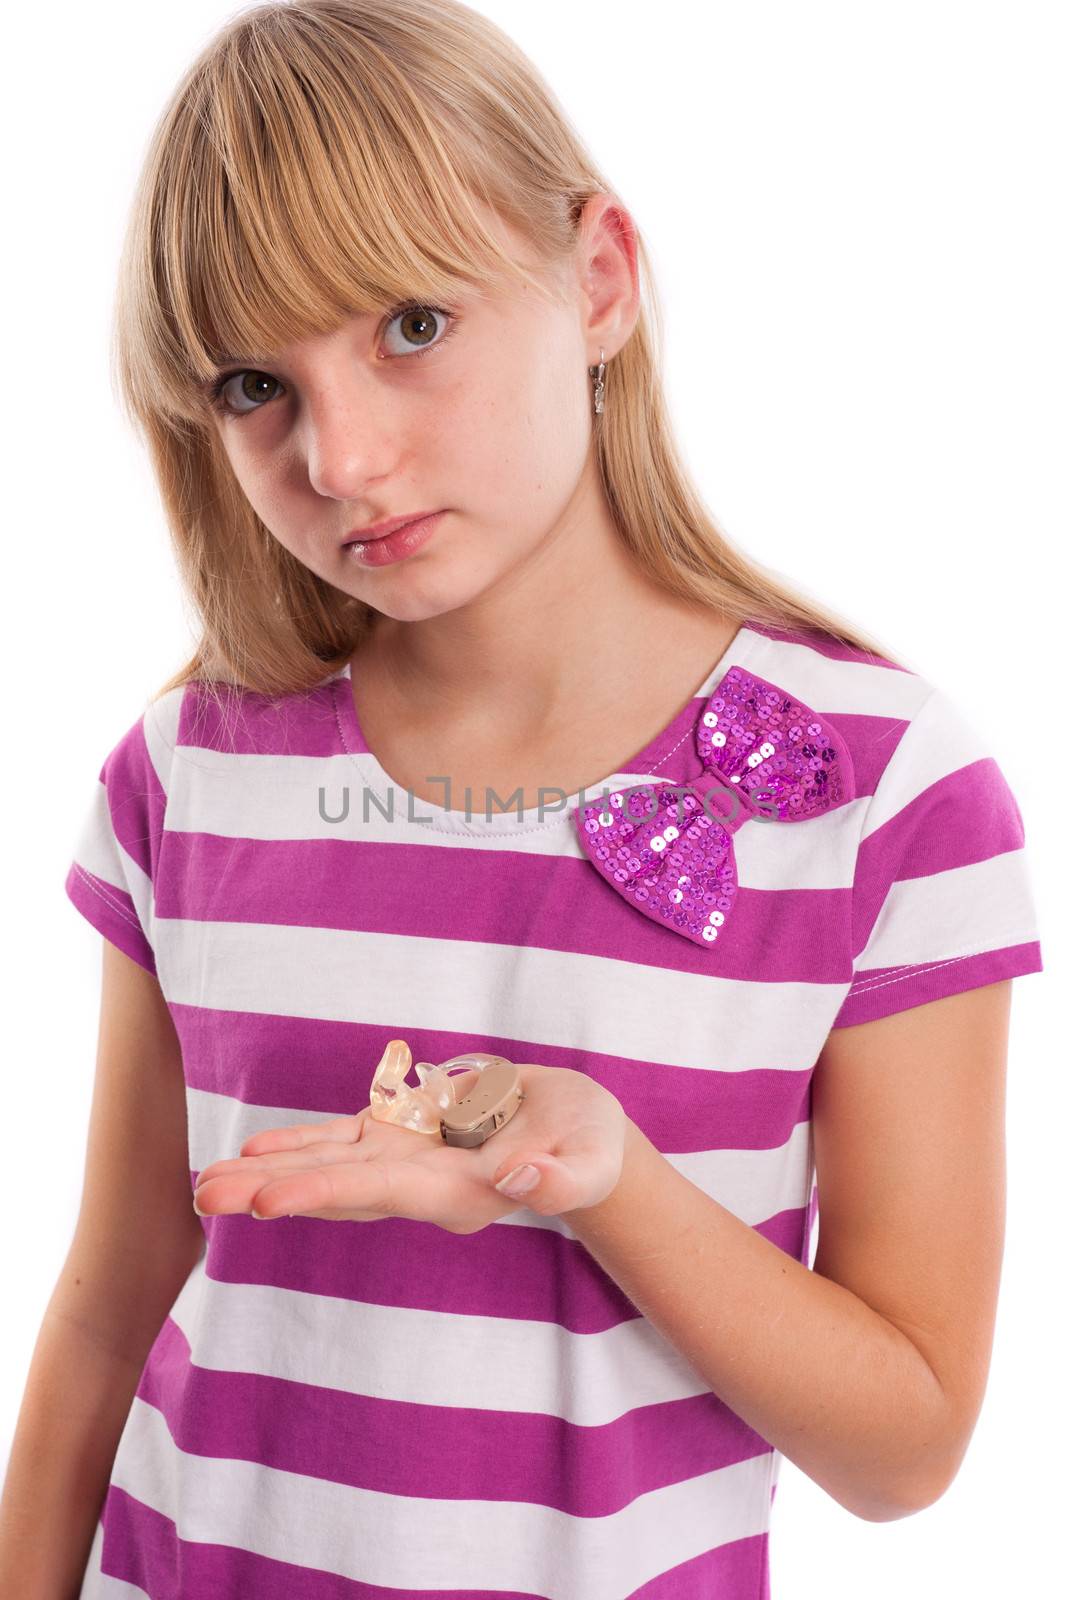 Girl showing her hearing aid in front of a white background.